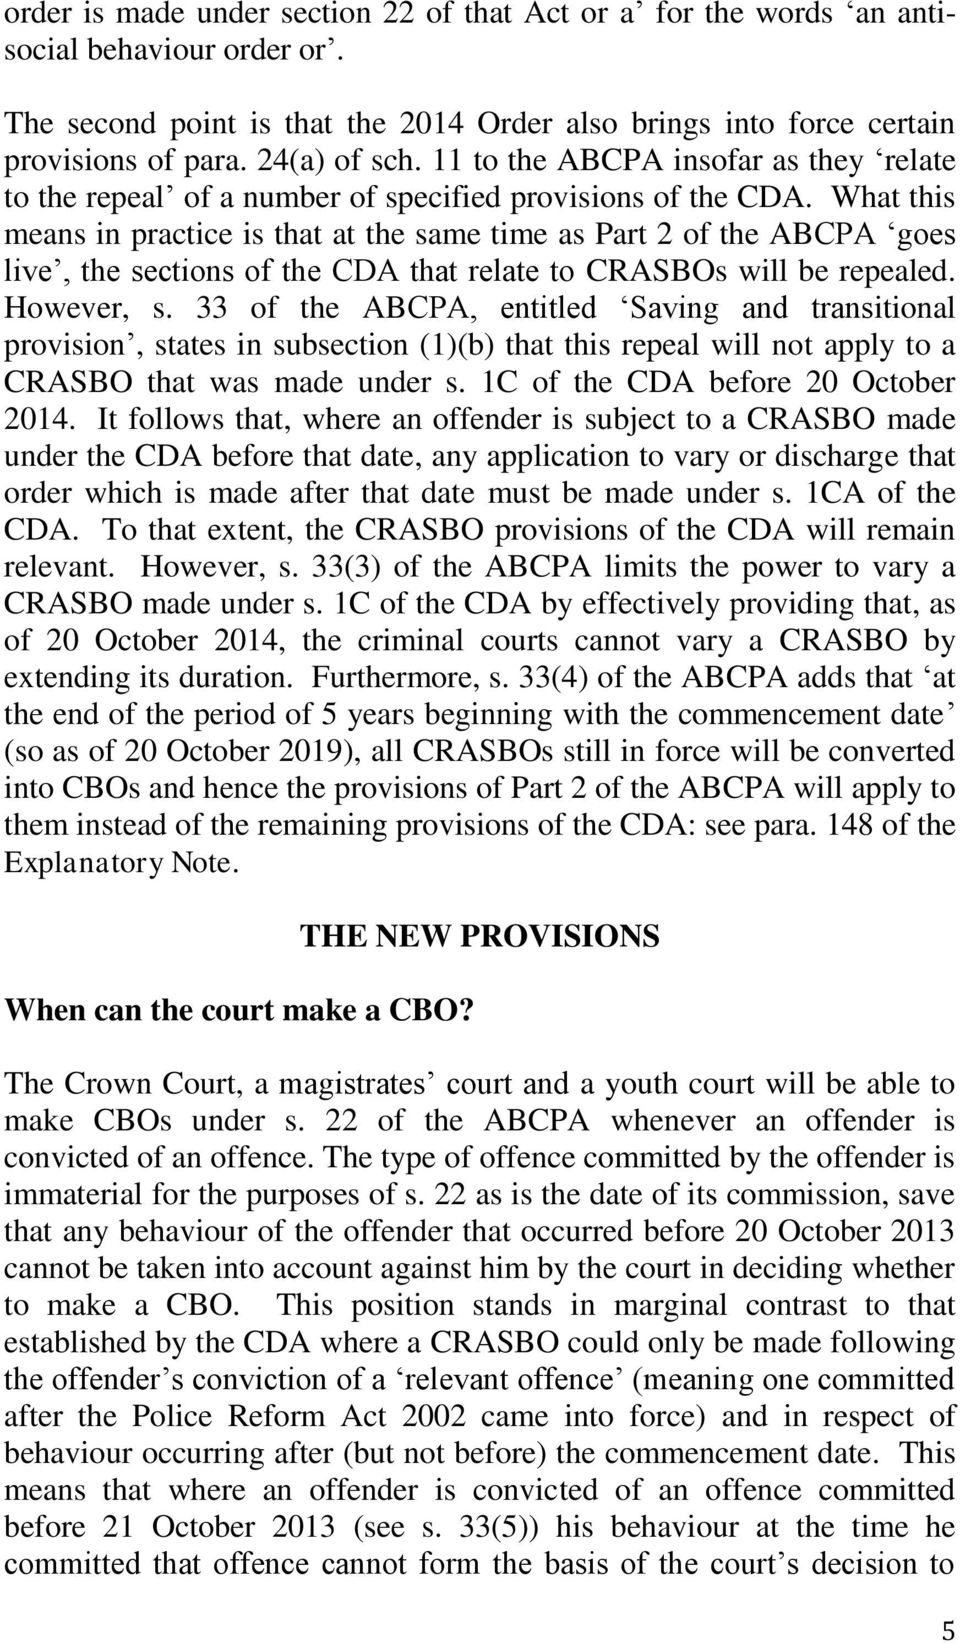 What this means in practice is that at the same time as Part 2 of the ABCPA goes live, the sections of the CDA that relate to CRASBOs will be repealed. However, s.